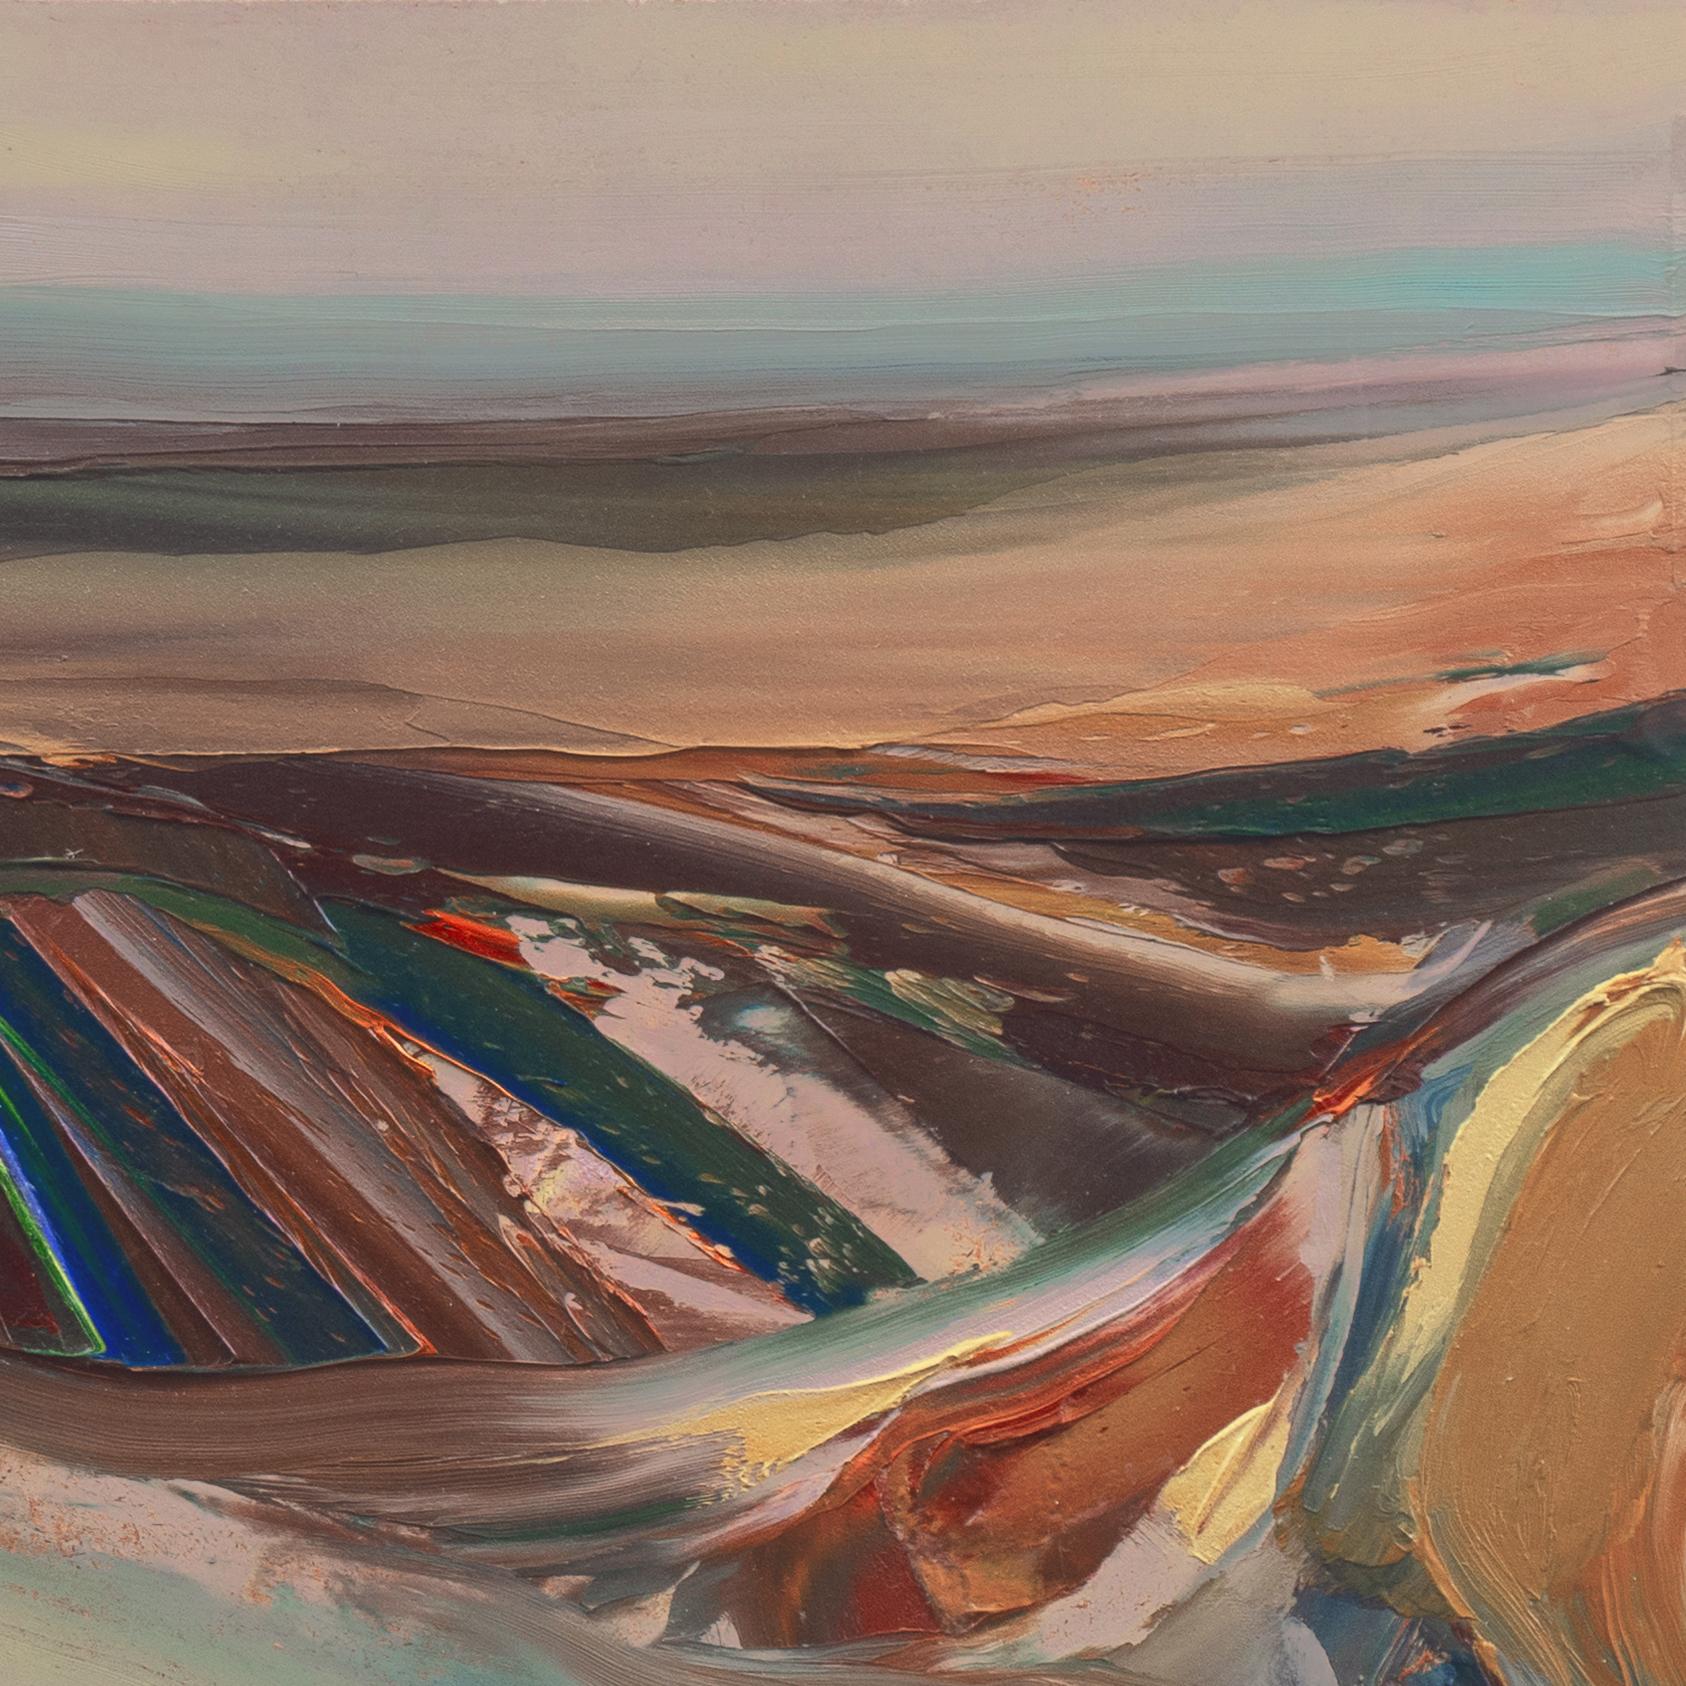  'Abstract Landscape', California College of Arts and Crafts, Oakland, Thiebaud For Sale 1